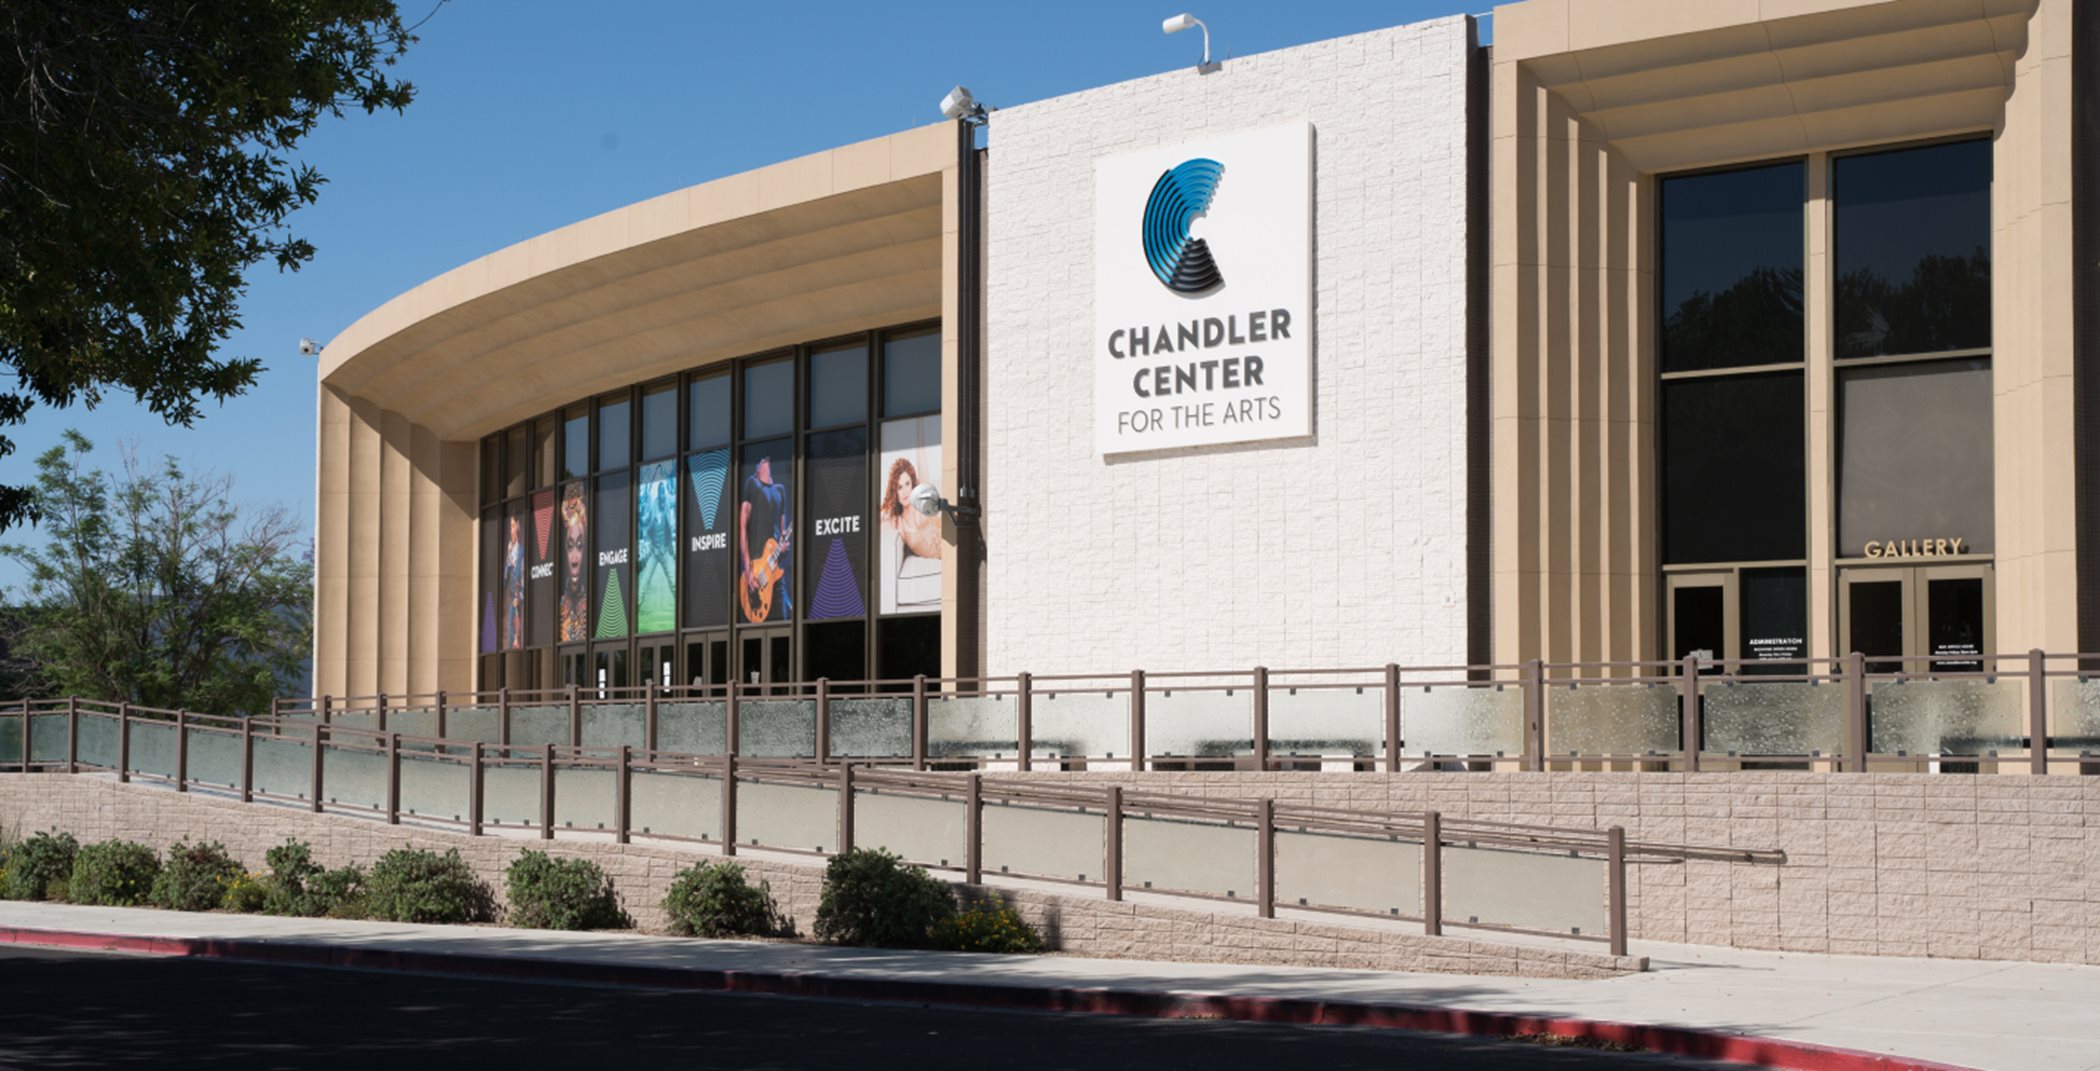 Exterior entrance for the Chandler Center for the Arts